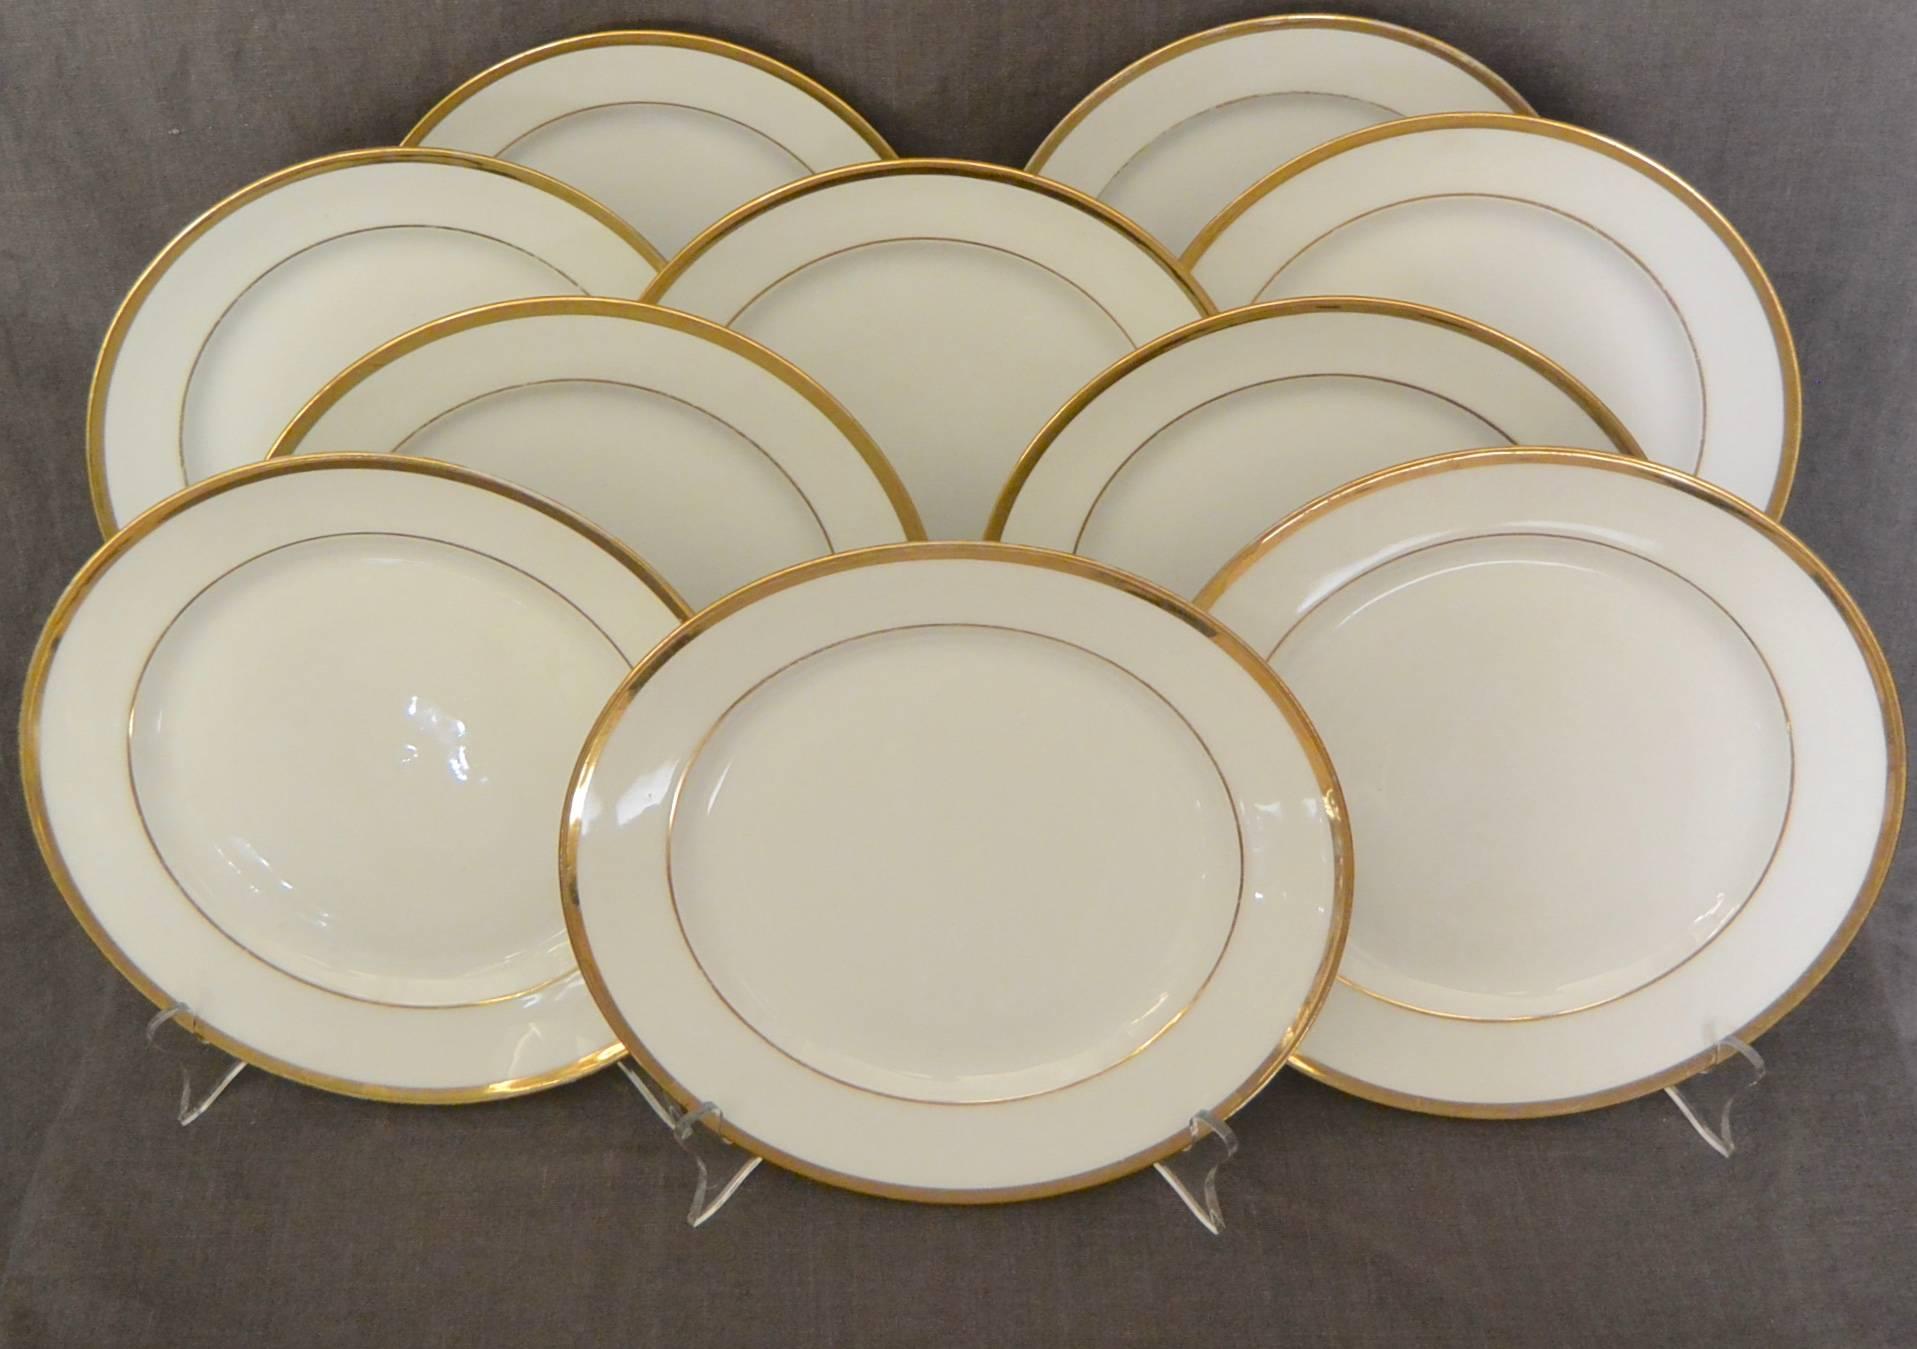 Set of ten white and gilt French Empire plates.  Set of ten Empire white and gilt plates with under-glaze red markings for L. Ernie 61 Rue du Bac., France, early 1800. 
Diameter: 9.25